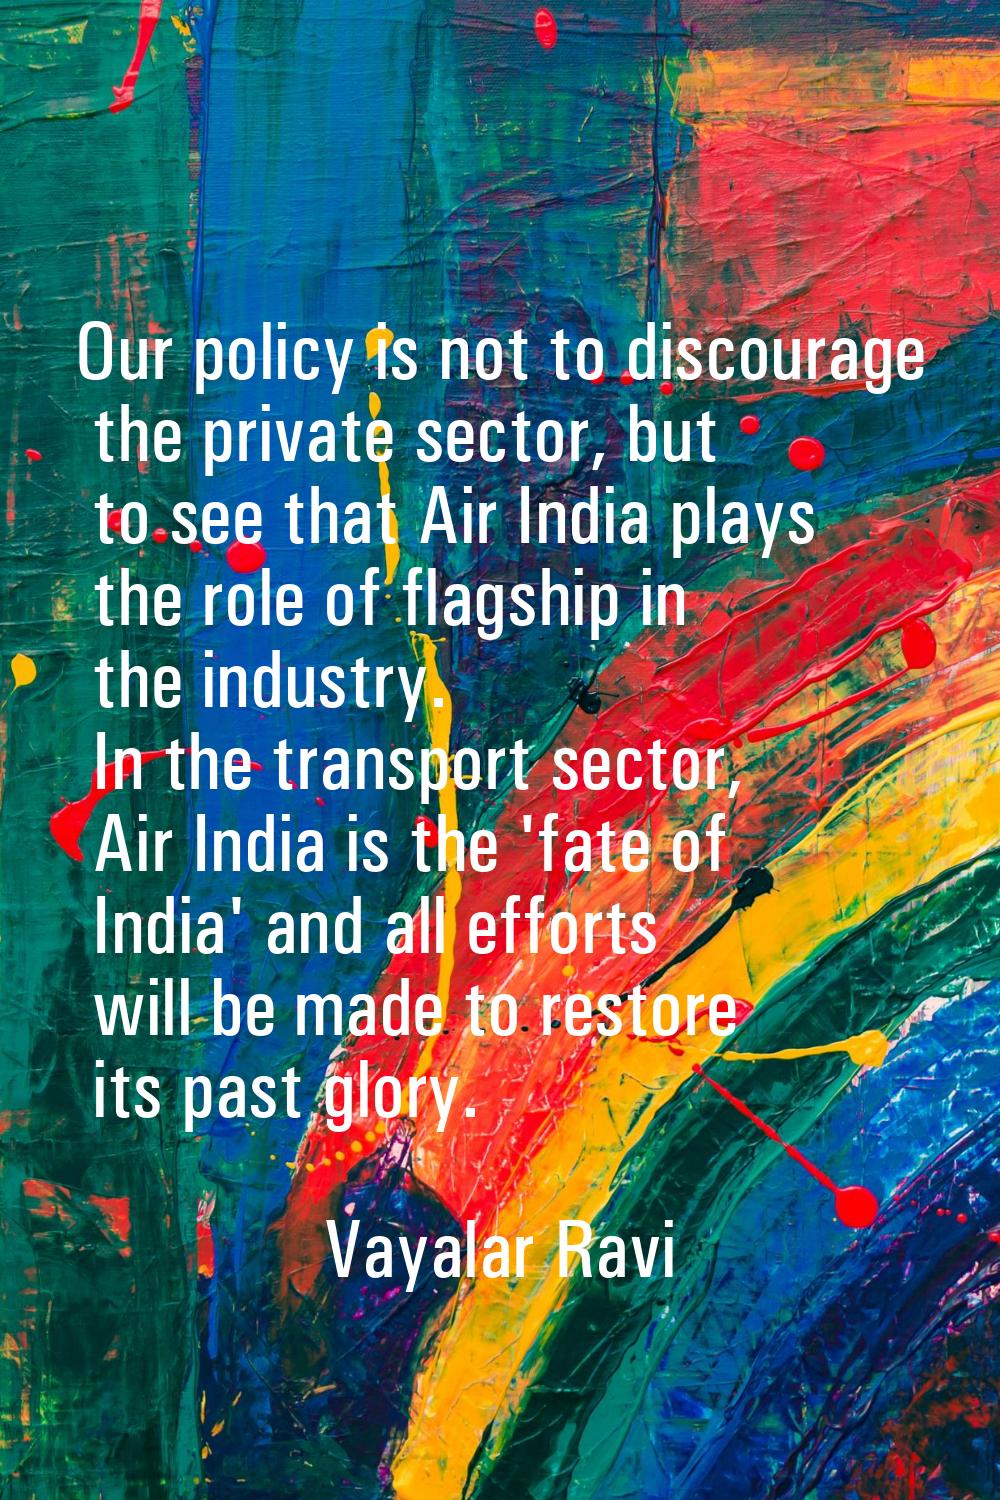 Our policy is not to discourage the private sector, but to see that Air India plays the role of fla